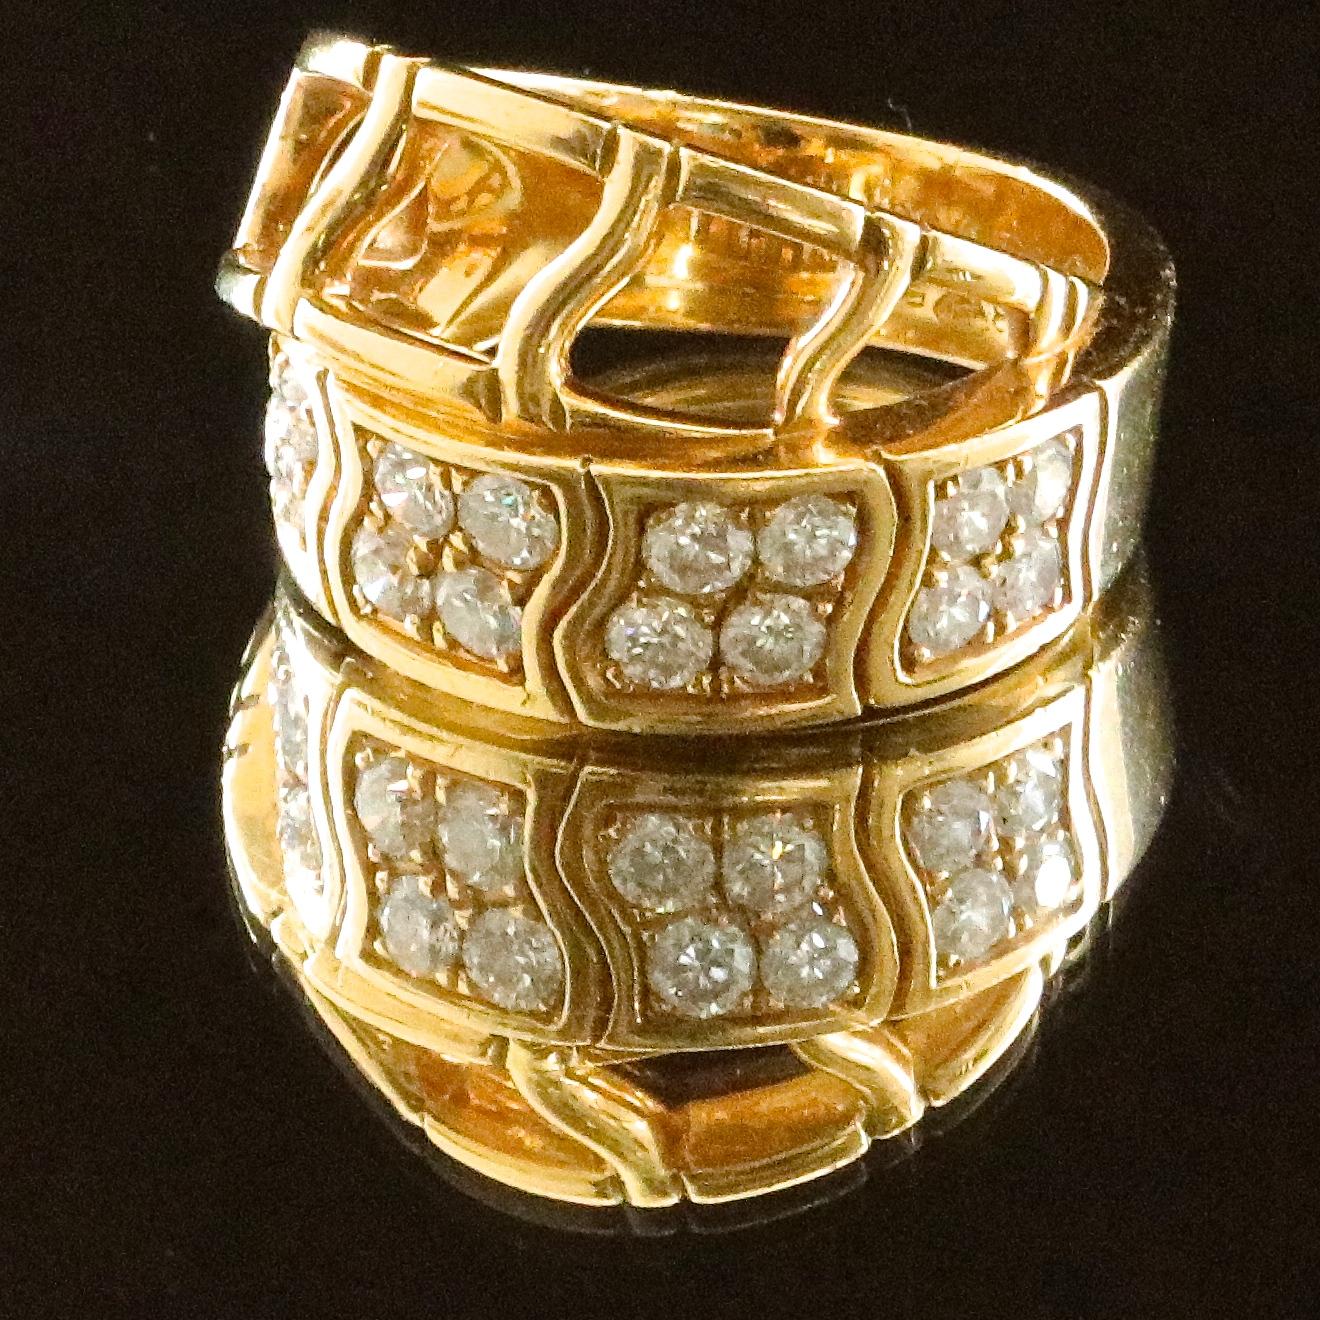 If you like solid gold pieces, accented by diamonds, this vintage diamond 18k gold Piaget ring is the one! Vintage, substantial gold pieces are a hot trend right now and are a must have. The ring features 16 round brilliant cut diamonds